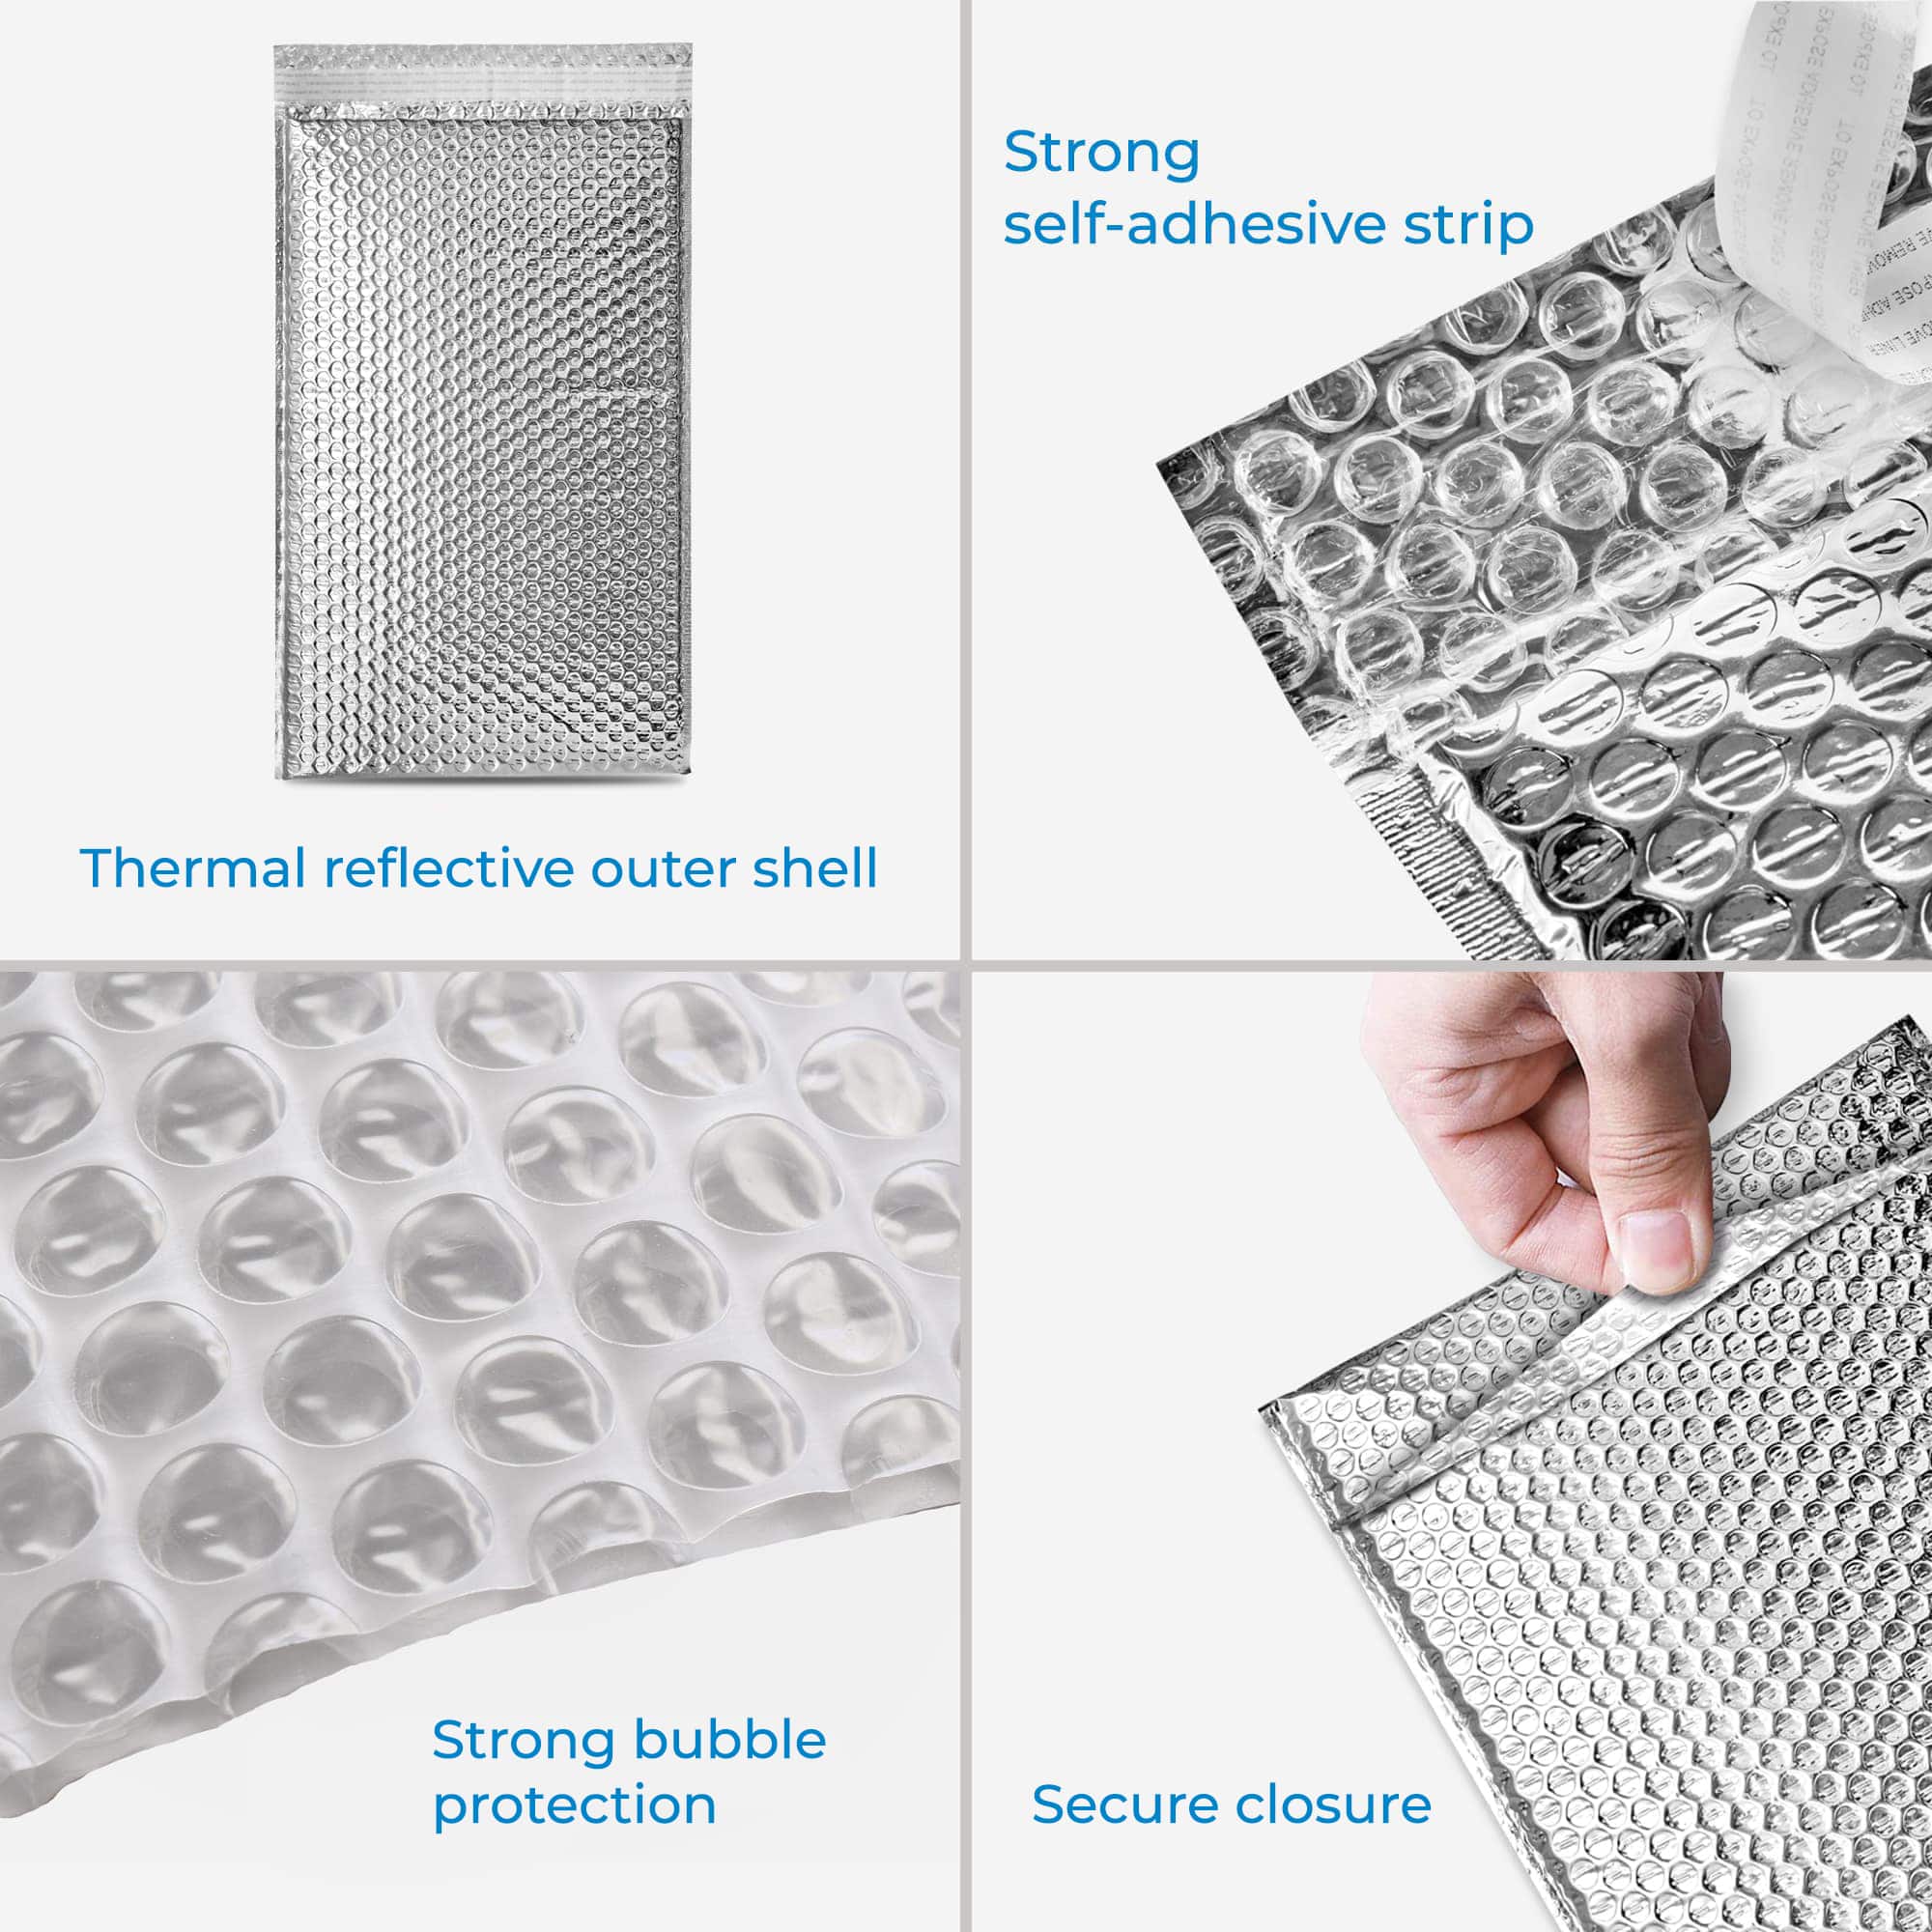 Thermal reflective insulated cold shield bubble mailer 8 x 11 inches, 100 pcs per case